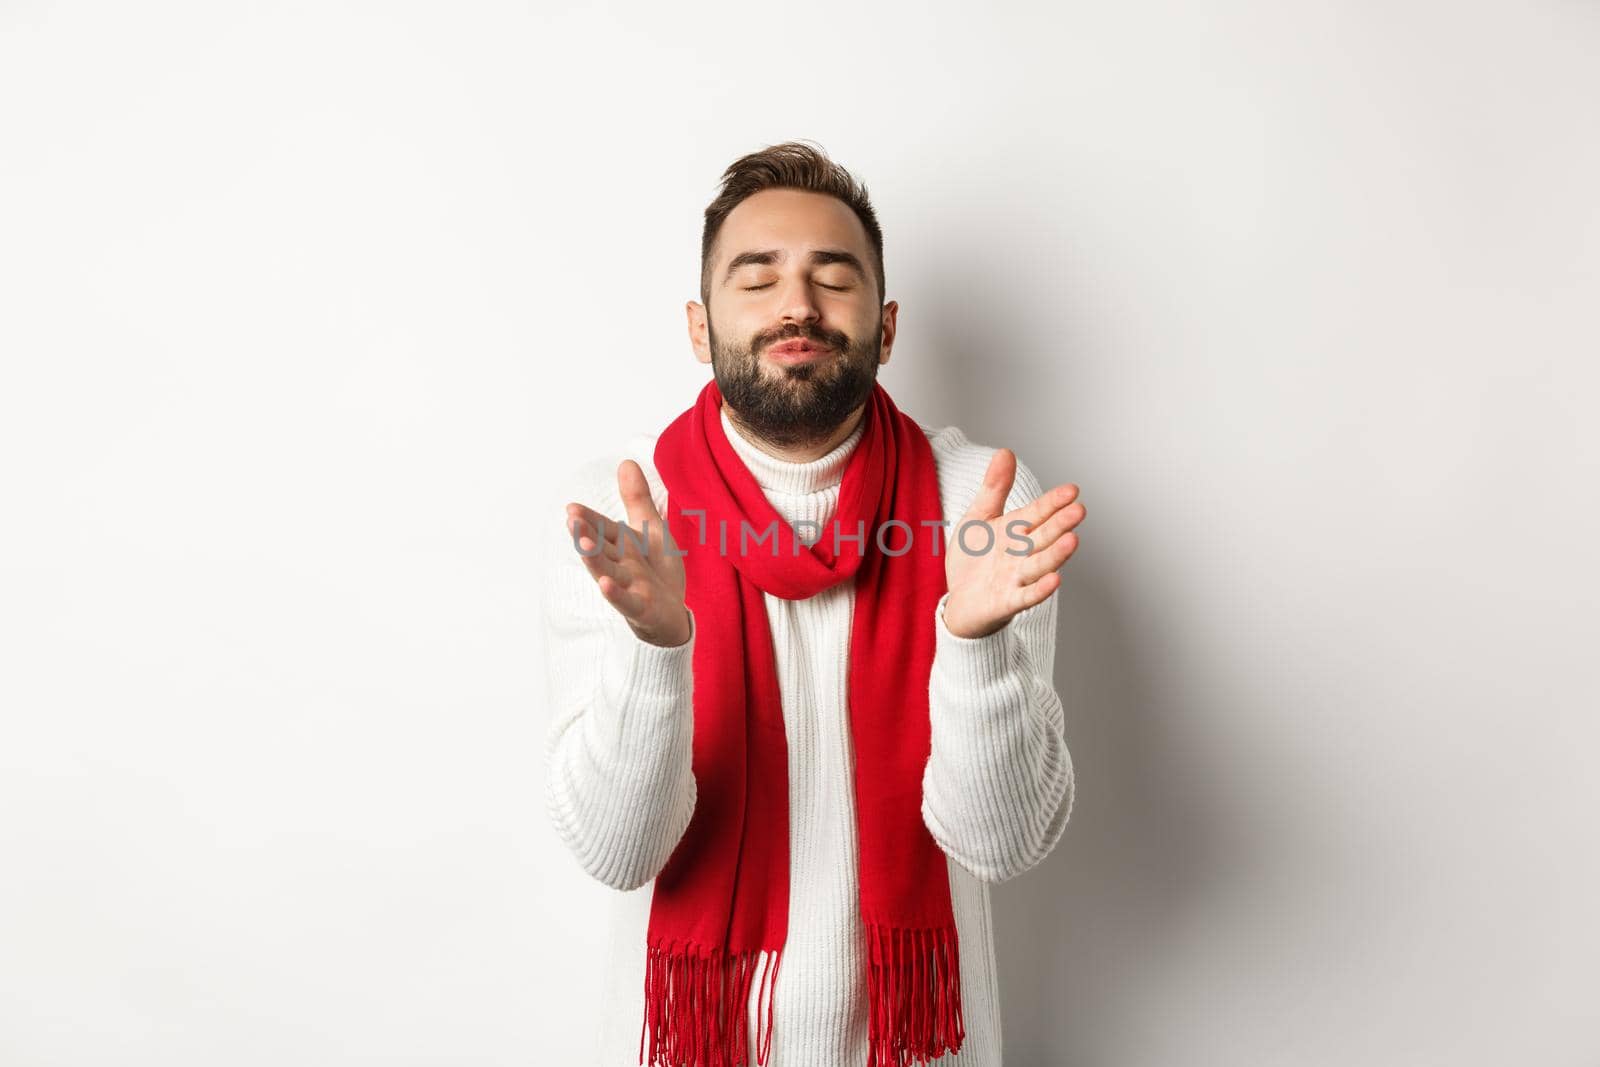 Handsome man in christmas sweater standing with closed eyes, puckered lips, leaning for kiss, standing over white background.